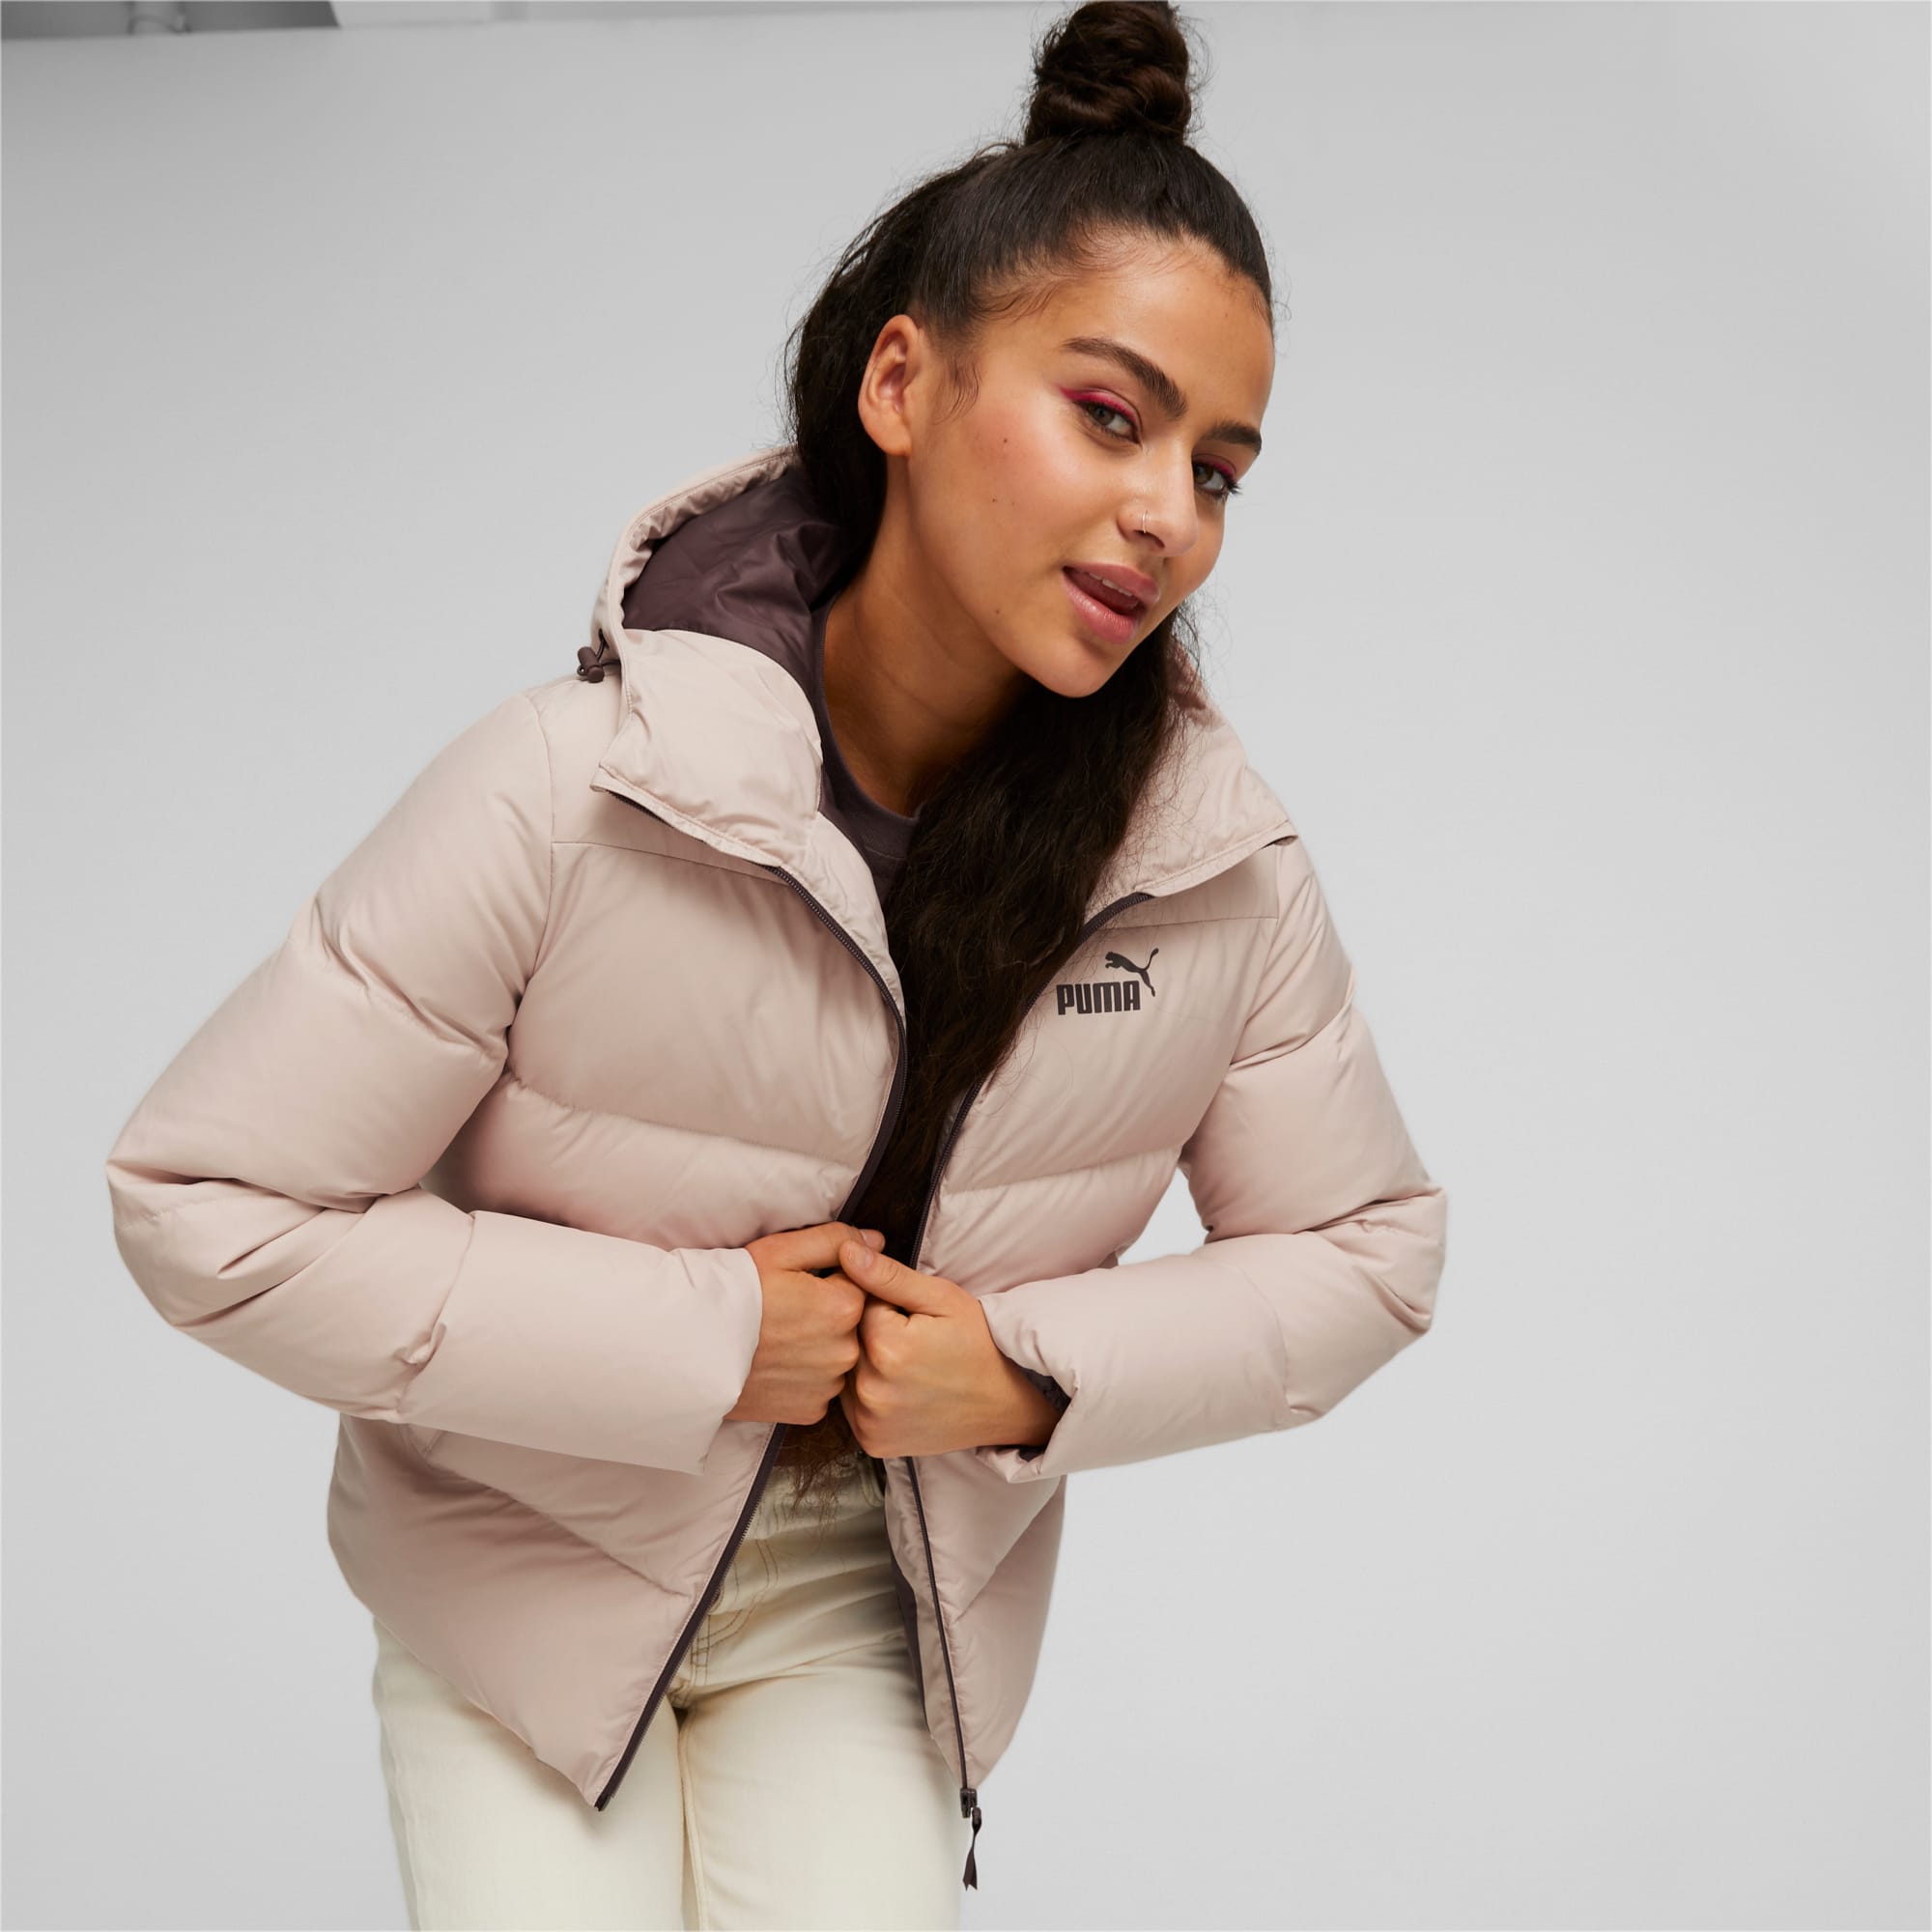 Pink And Black Puffer Jacket For Women